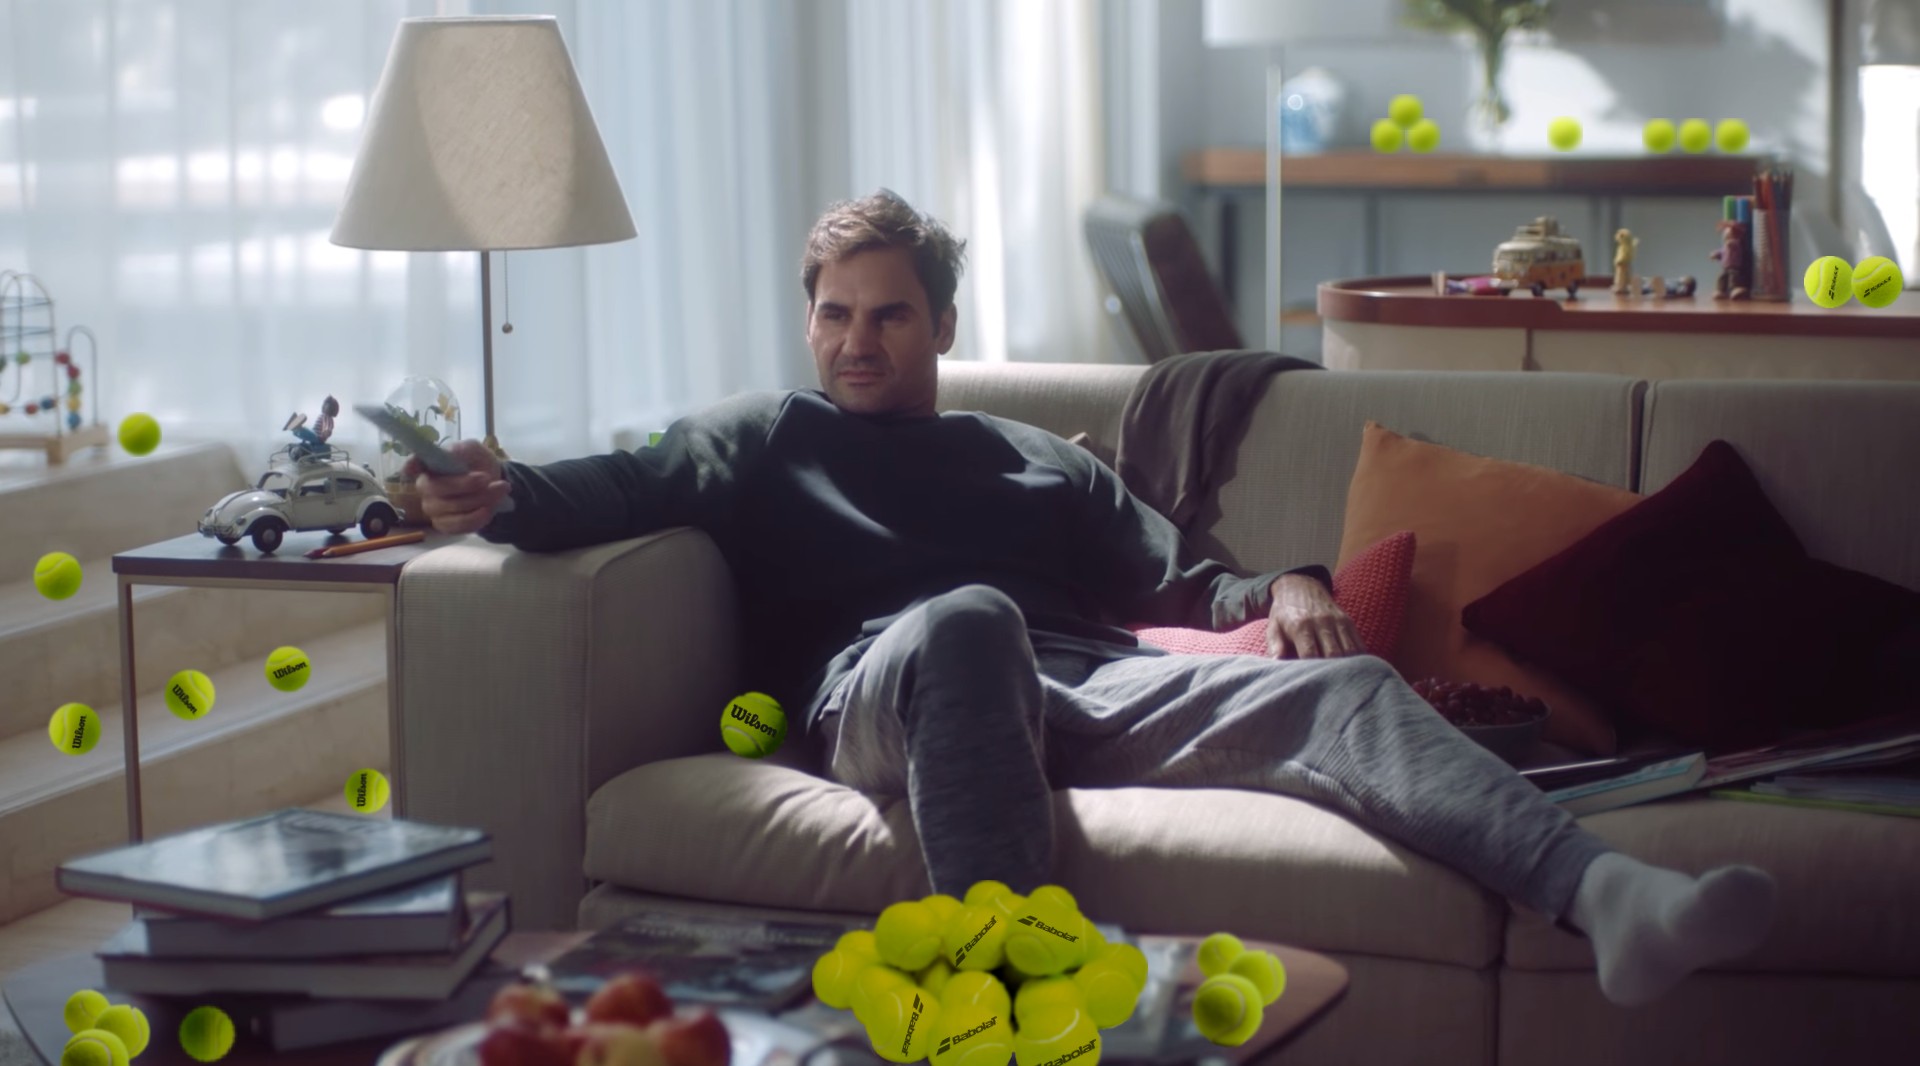 “I have kept every single tennis ball I’ve ever played with” reveals Roger Federer